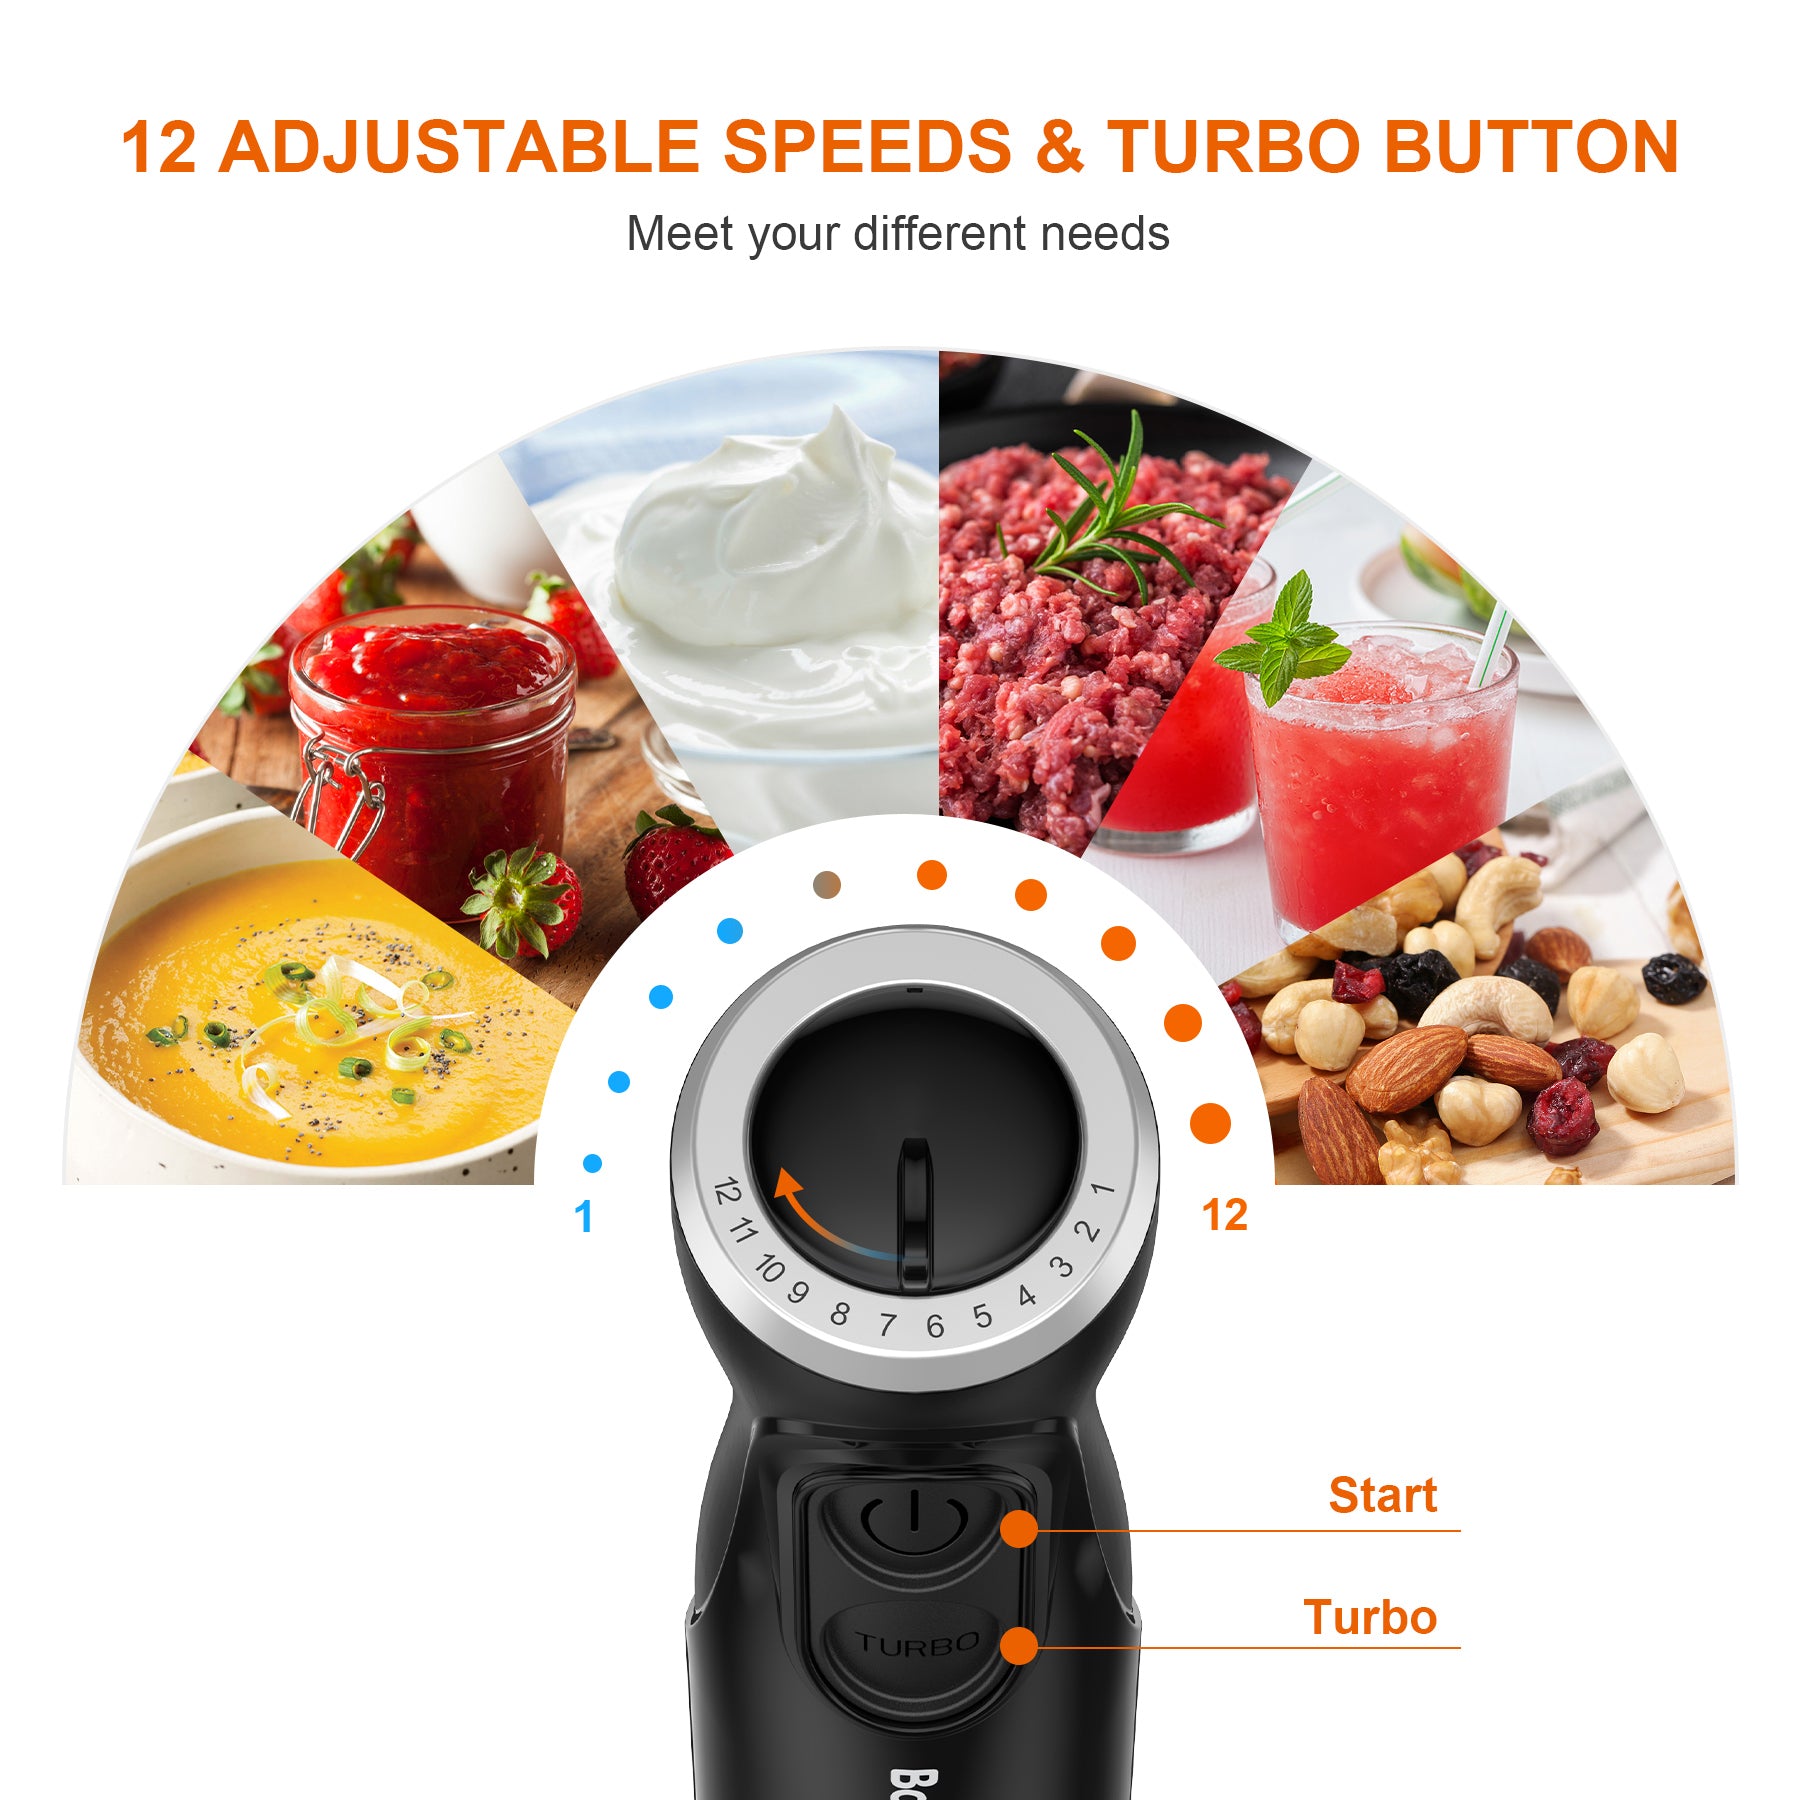 1000W Handheld Blender, 12 Speed and Turbo Mode, Electric Hand Blender  Stainless Steel Immersion Handheld Stick Blender for Soup Puree Baby Food  EU